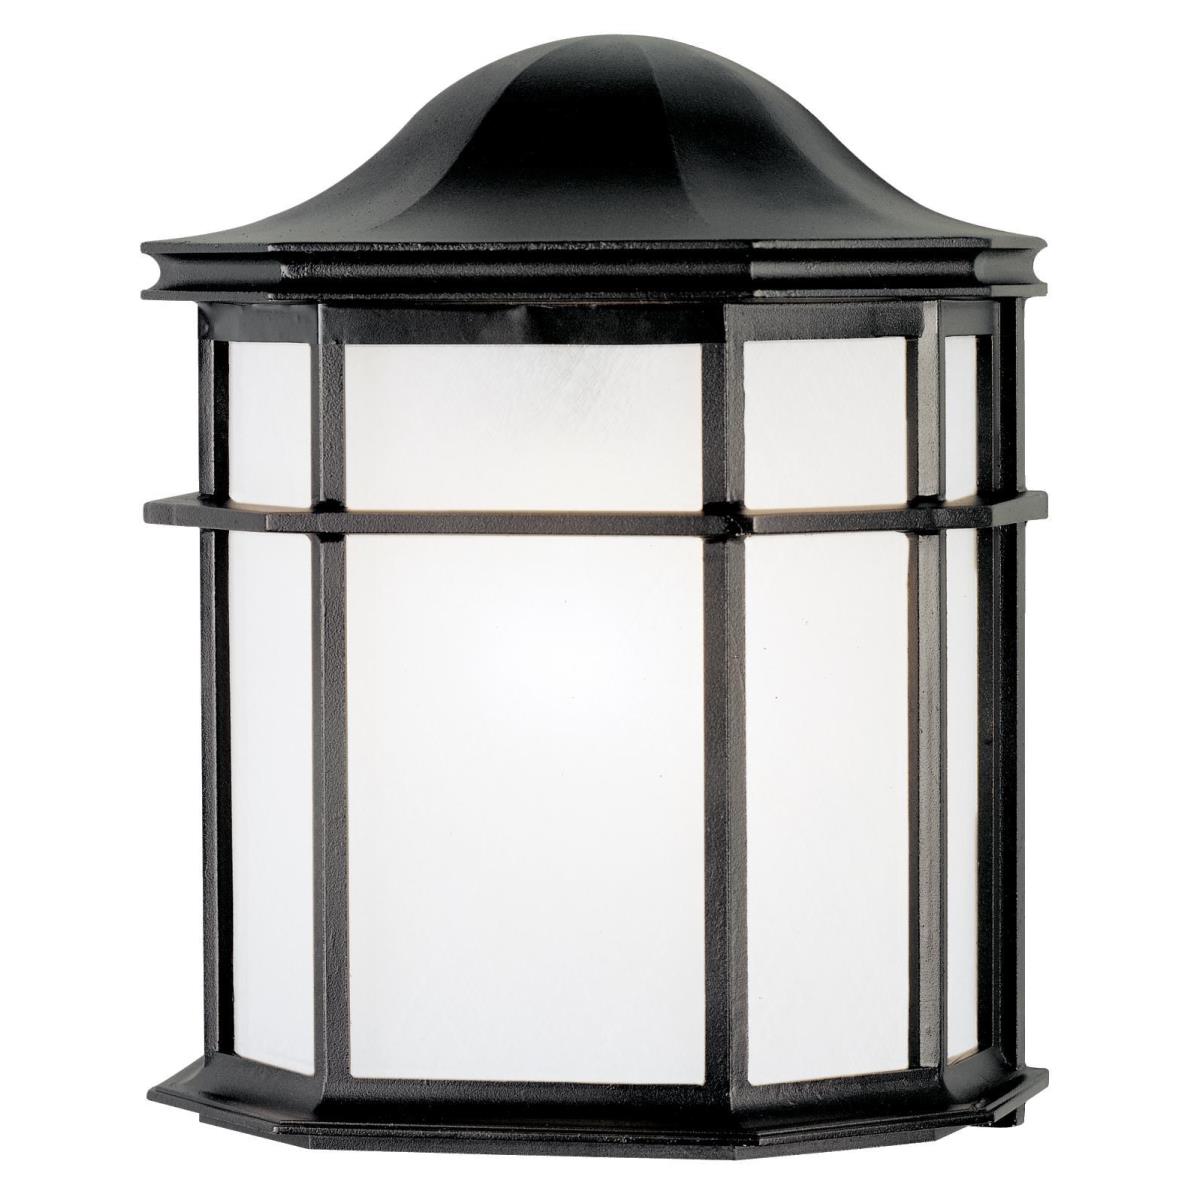 1 Light Wall Fixture Textured Black Finish with White Acrylic Lens